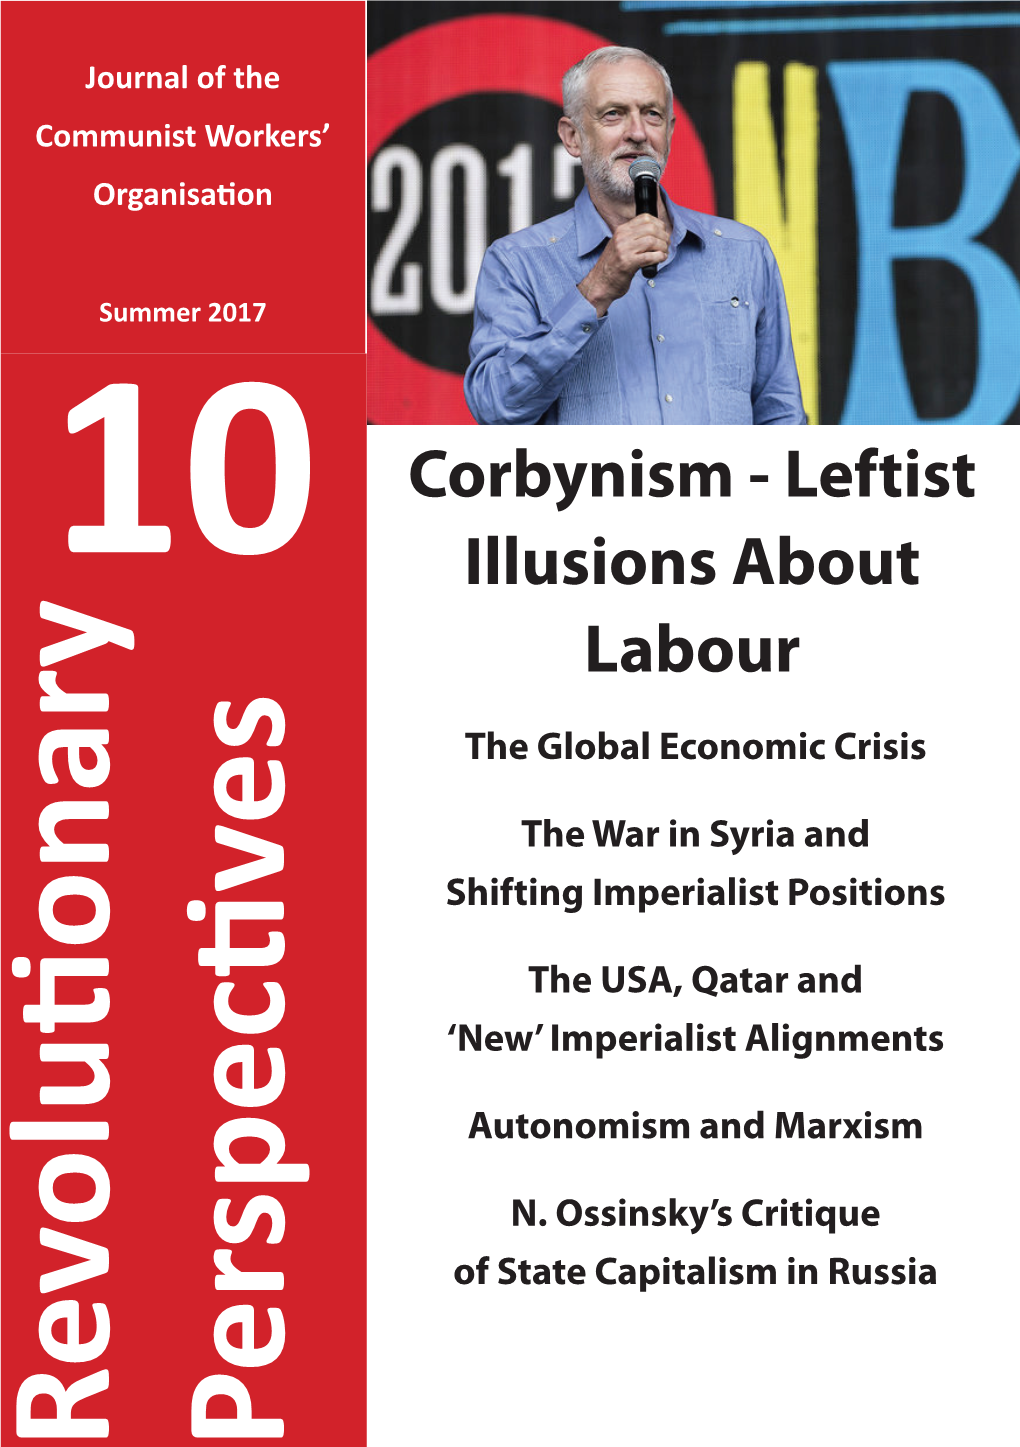 Revolutionary Perspectives Magazine of the Communist Workers’ Organisation Affiliate of the Internationalist Communist Tendency Series 4, No 10, Summer 2017